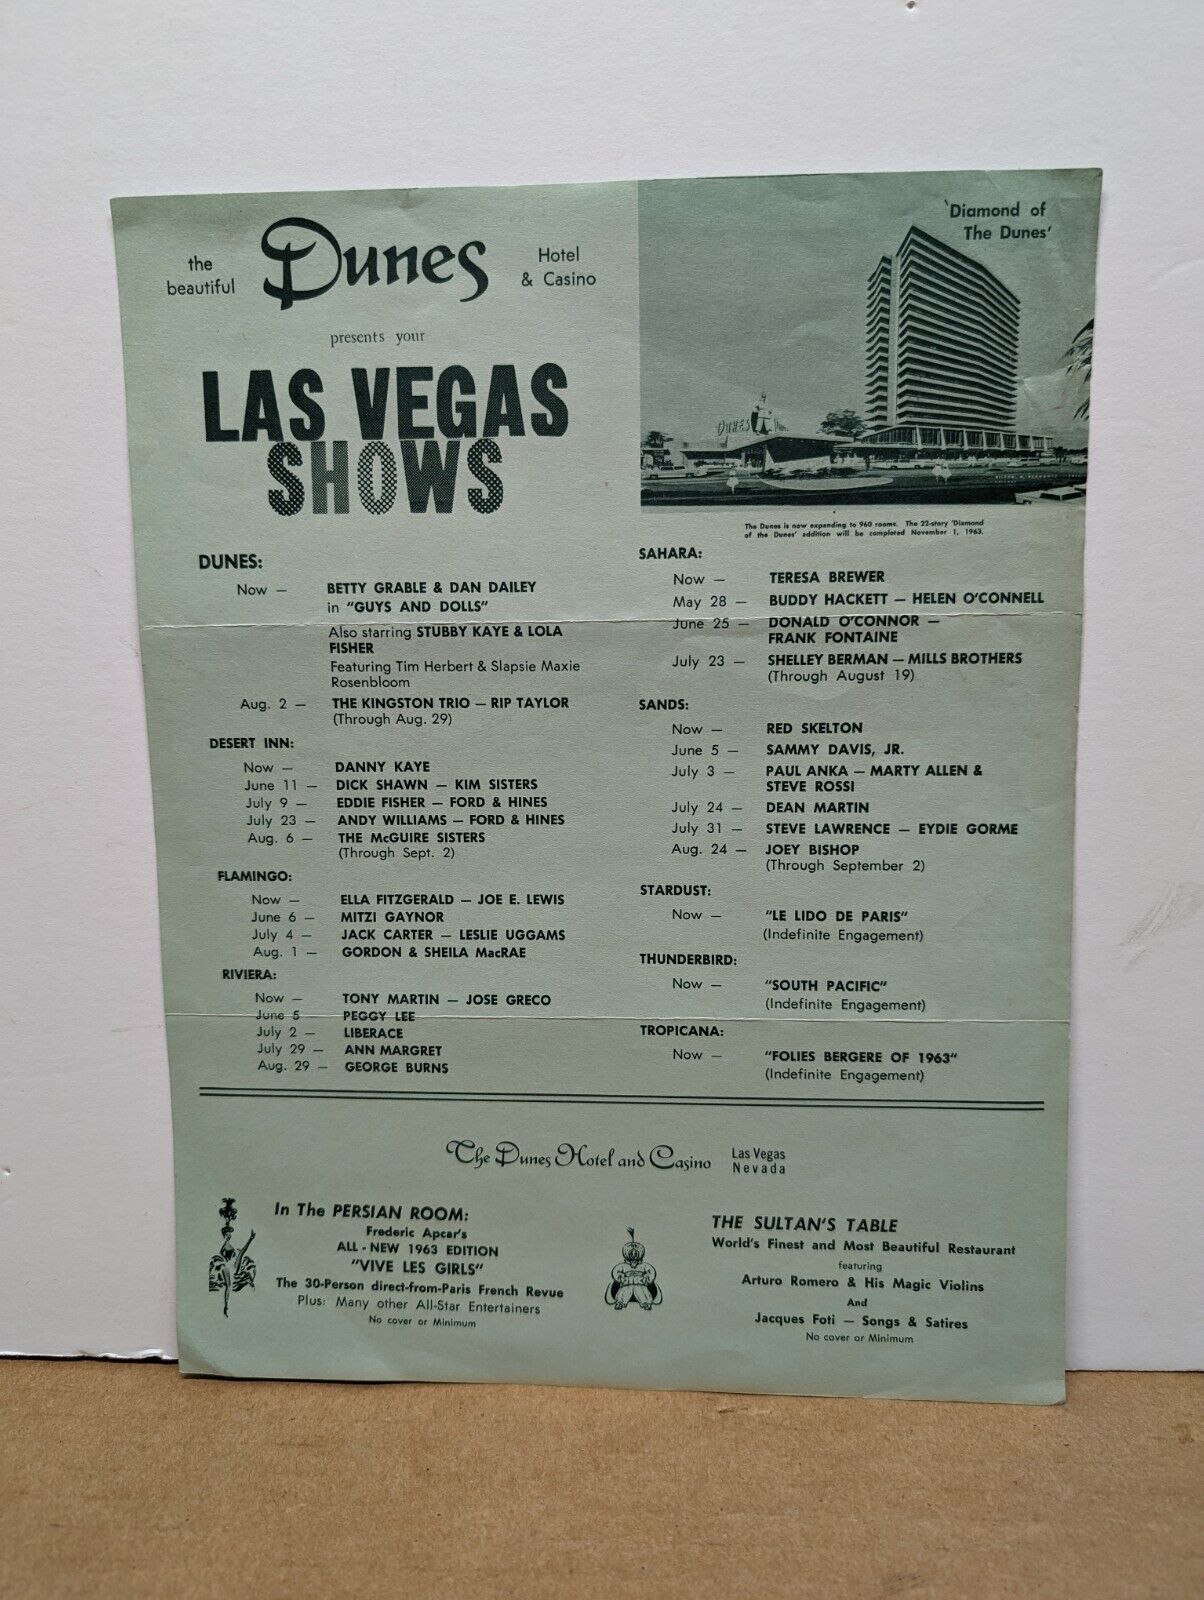 Vintage Las Vegas Shows Flyer from the early 60s